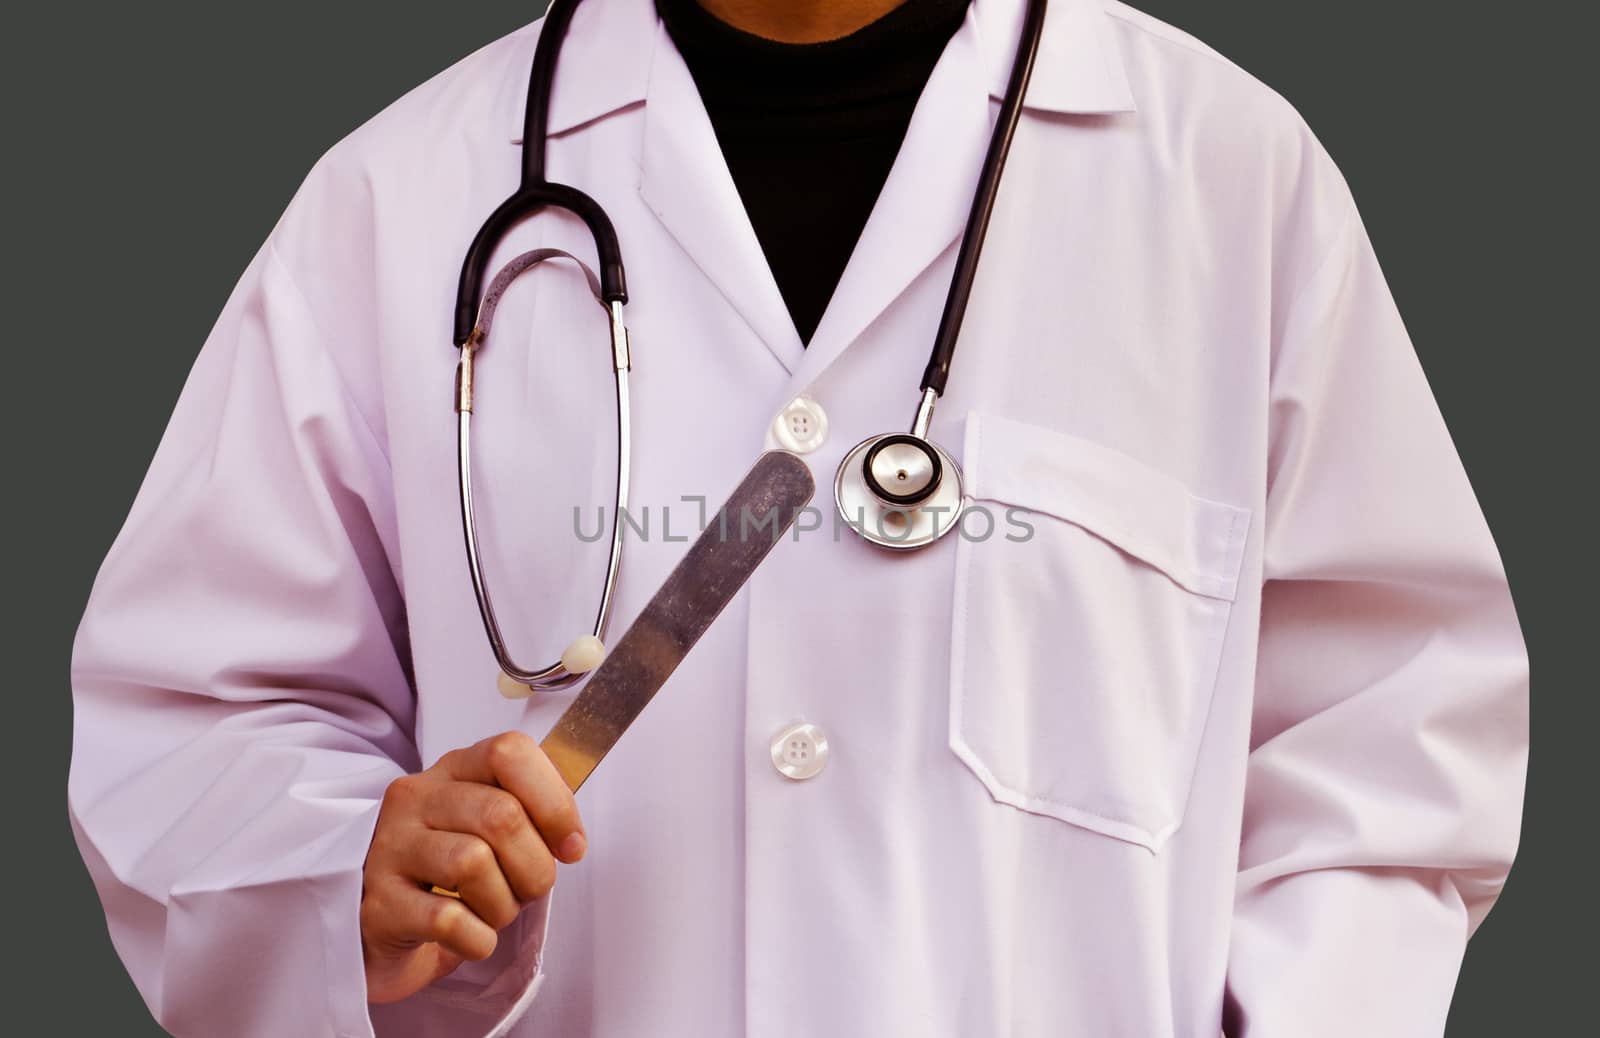 Medical Doctor with stethoscope by jengit